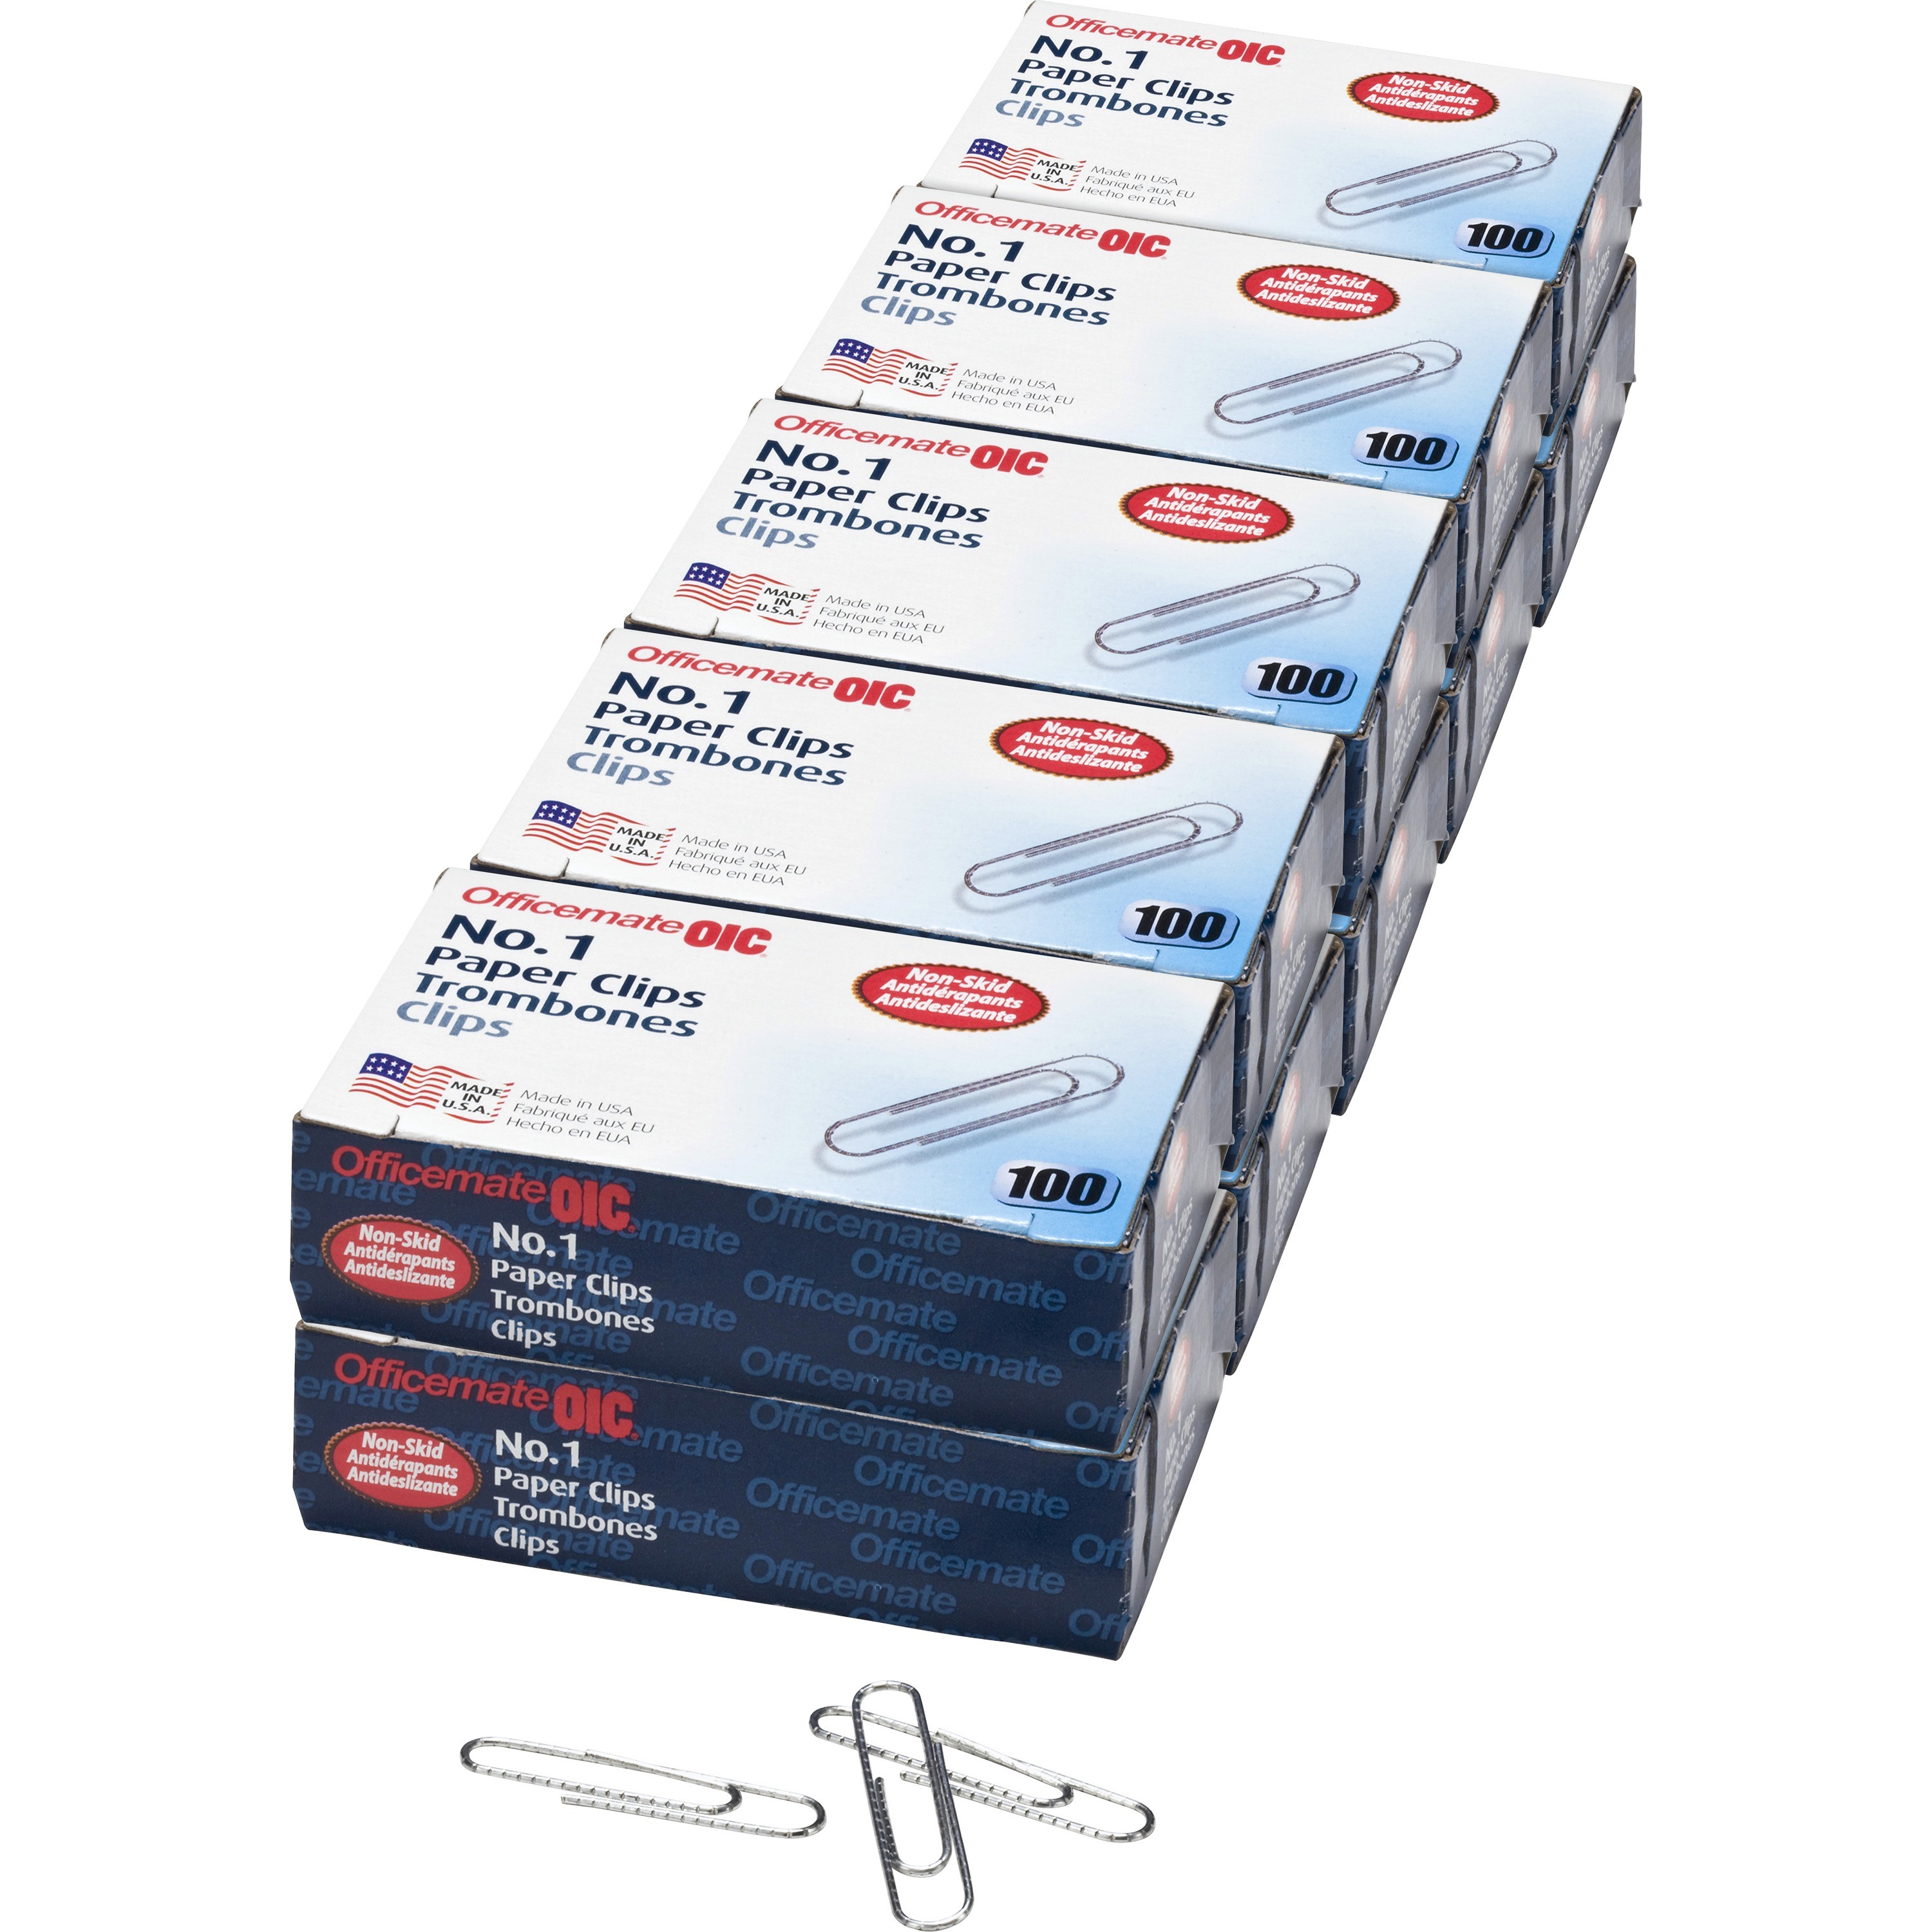 Essential Giant Serrated Paperclip (Pack of 100)